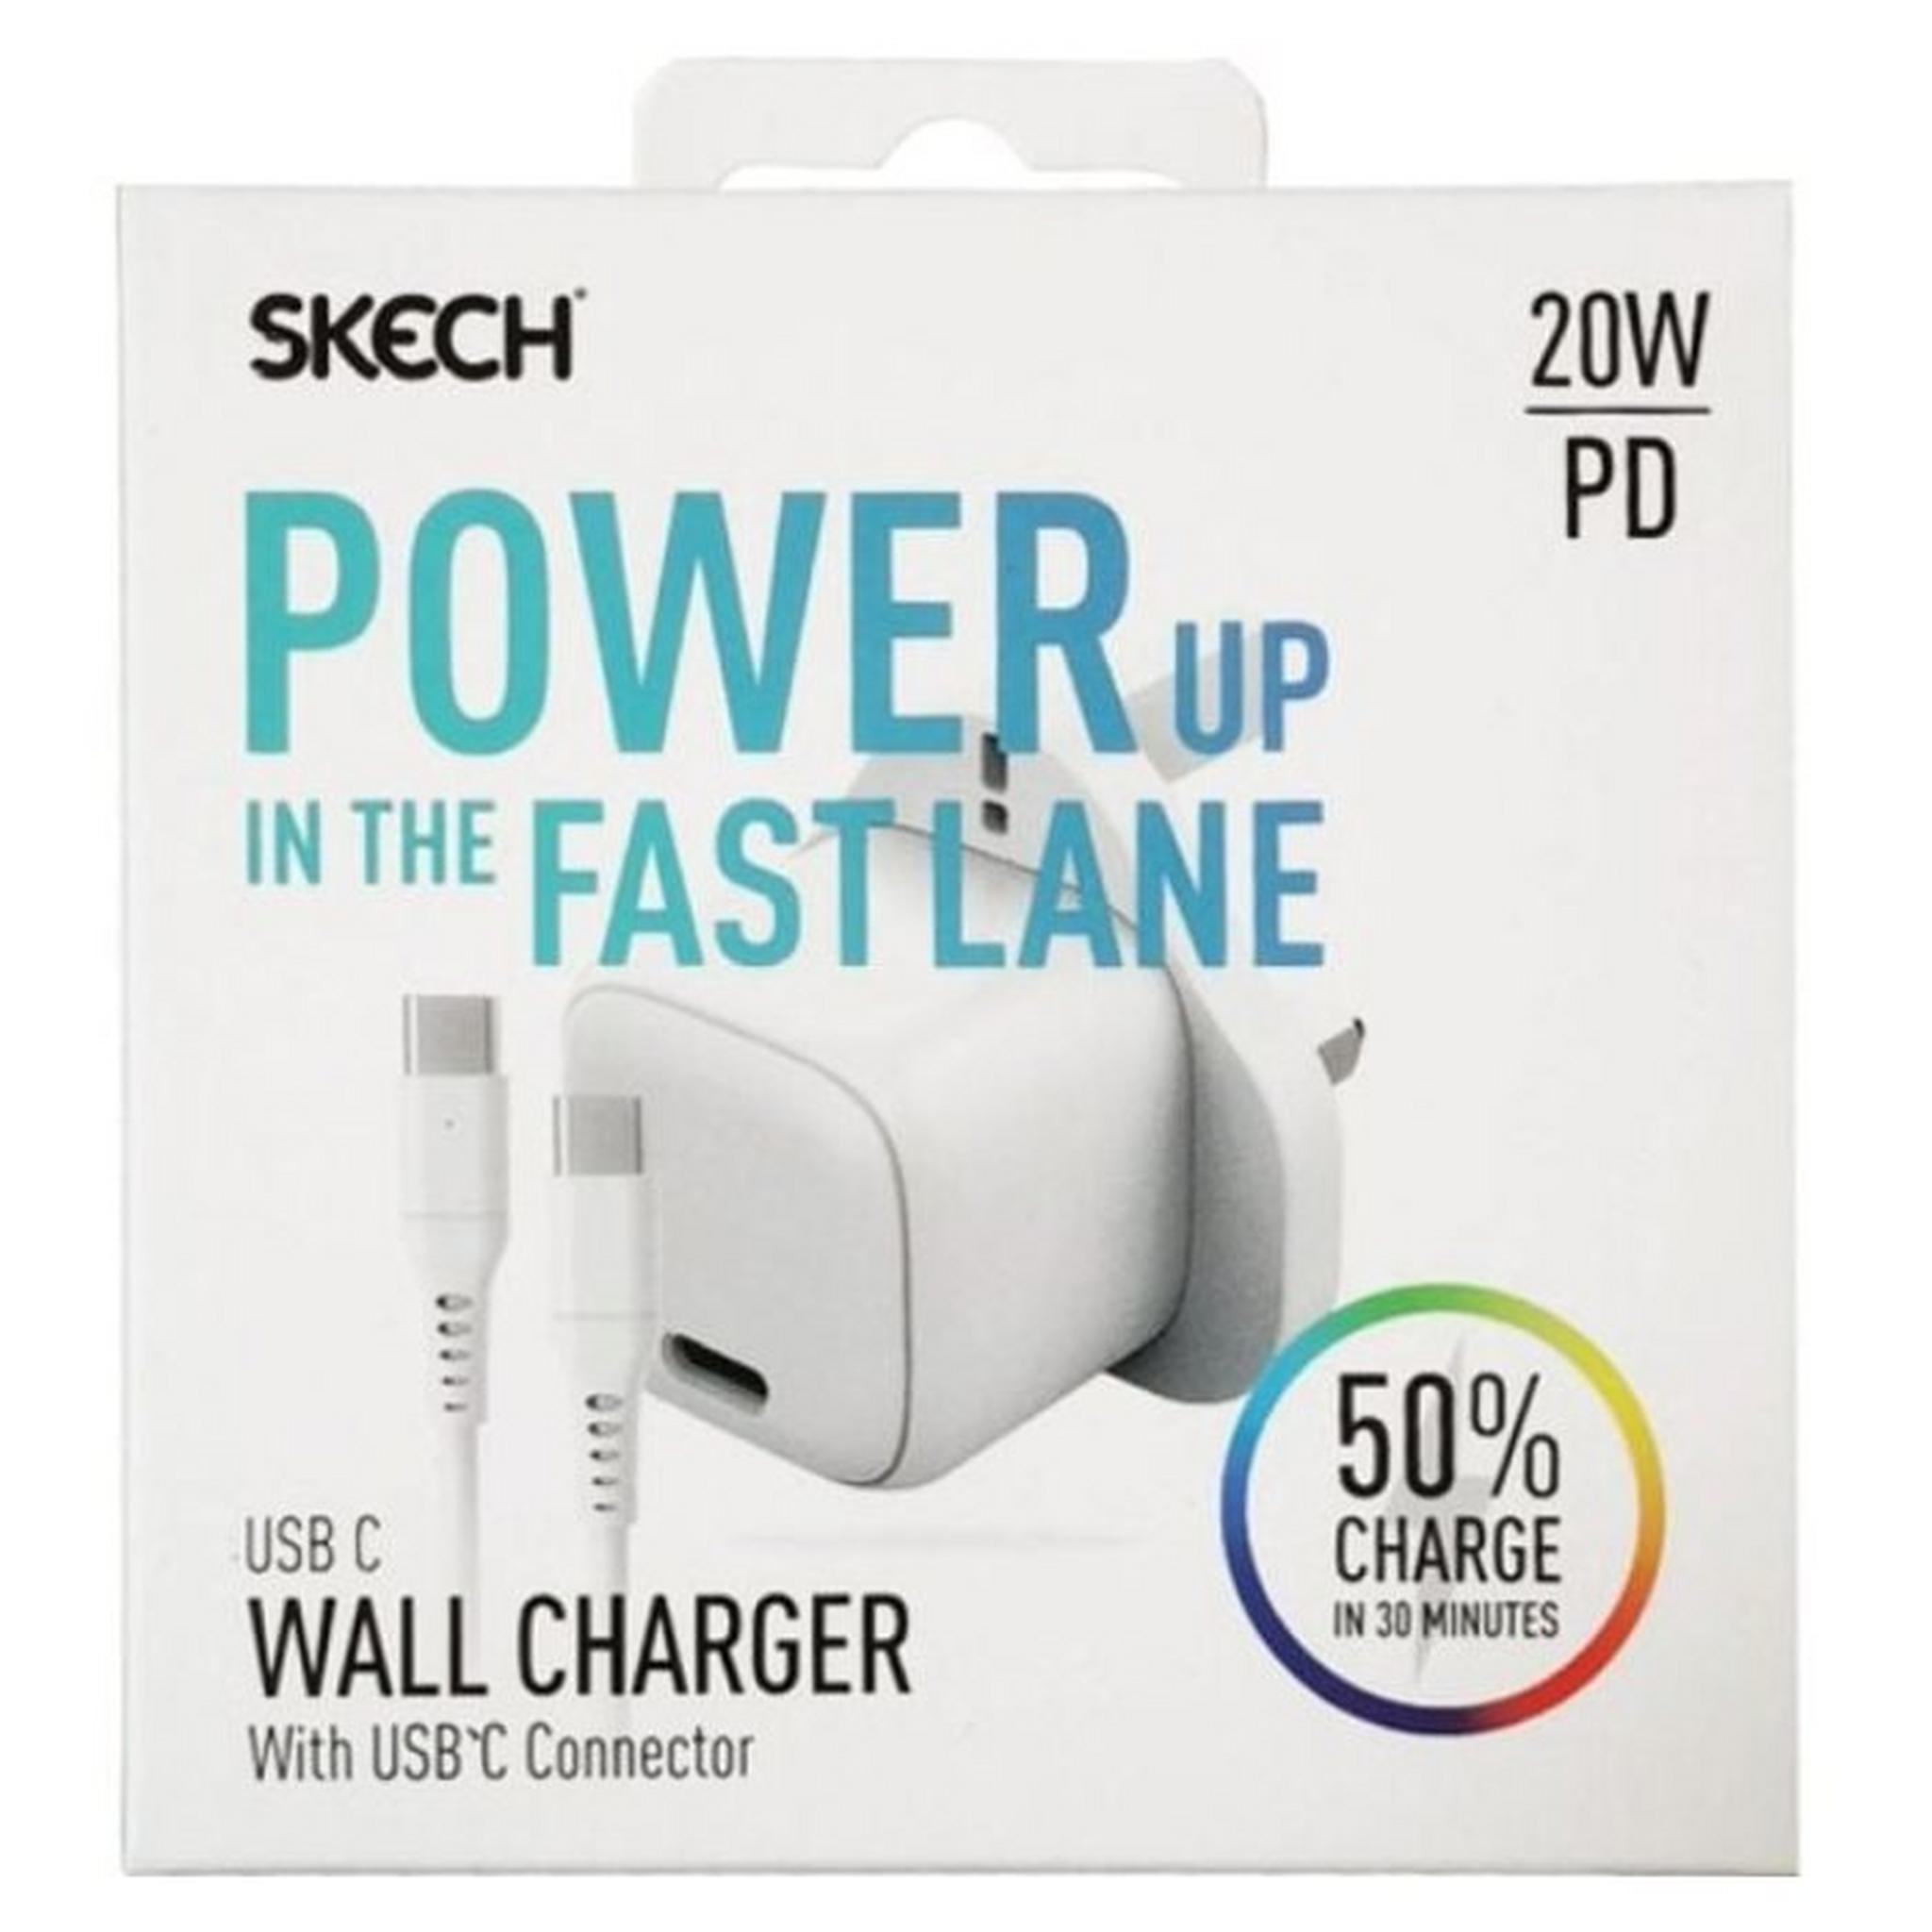 Skech Power USB-C Charger With USB-C Cable, 20W, SKEL-PD20UK-WC-WTE – White